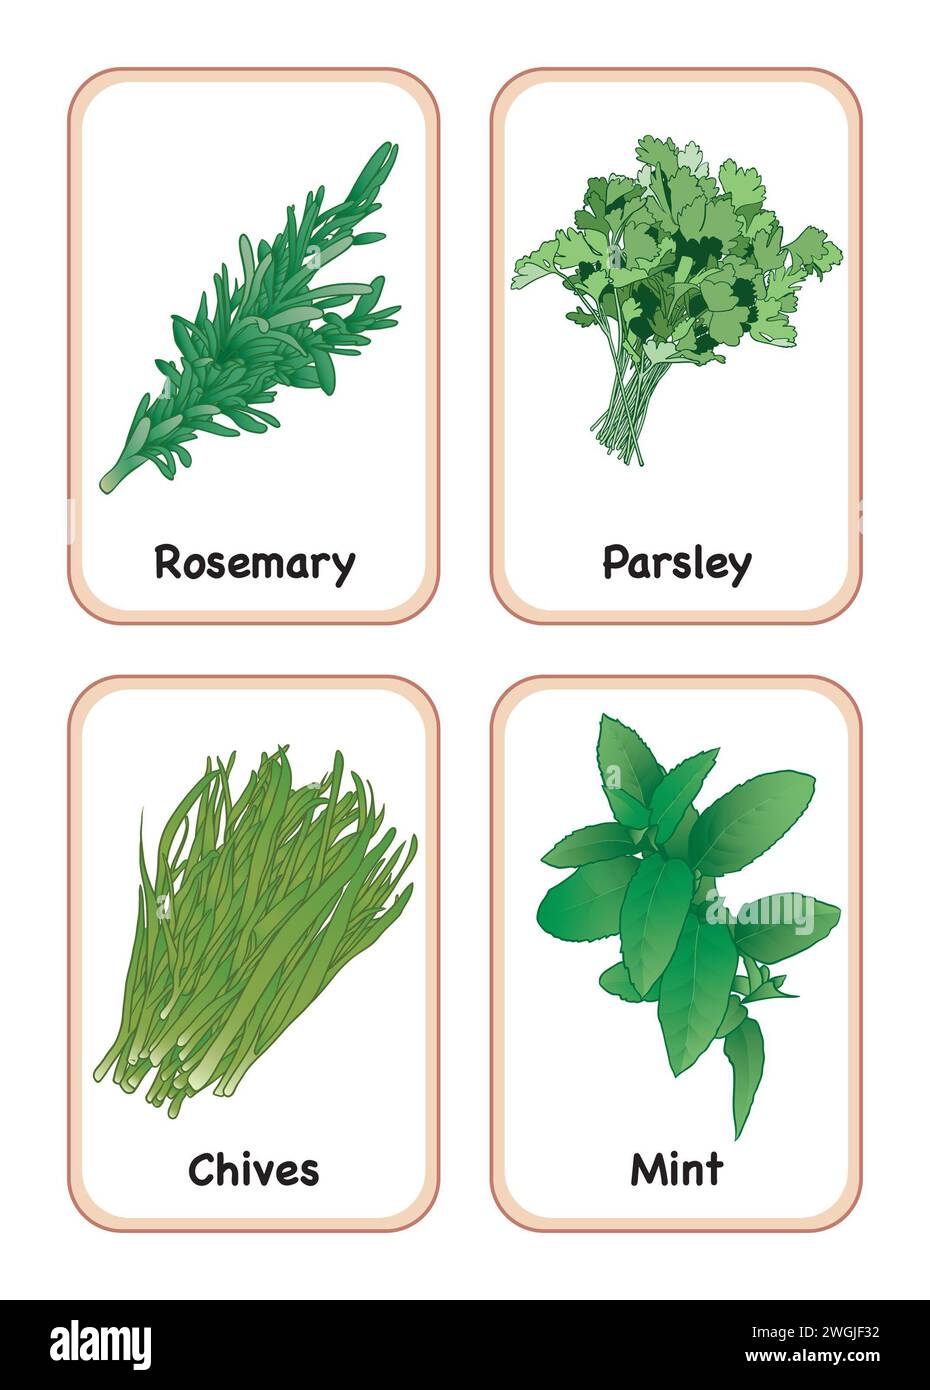 Art labels for herb jars, gardening, plant pot labels, educational identification cards, recipe cards, cook book art rosemary, parsley, chives, mint. Stock Photo